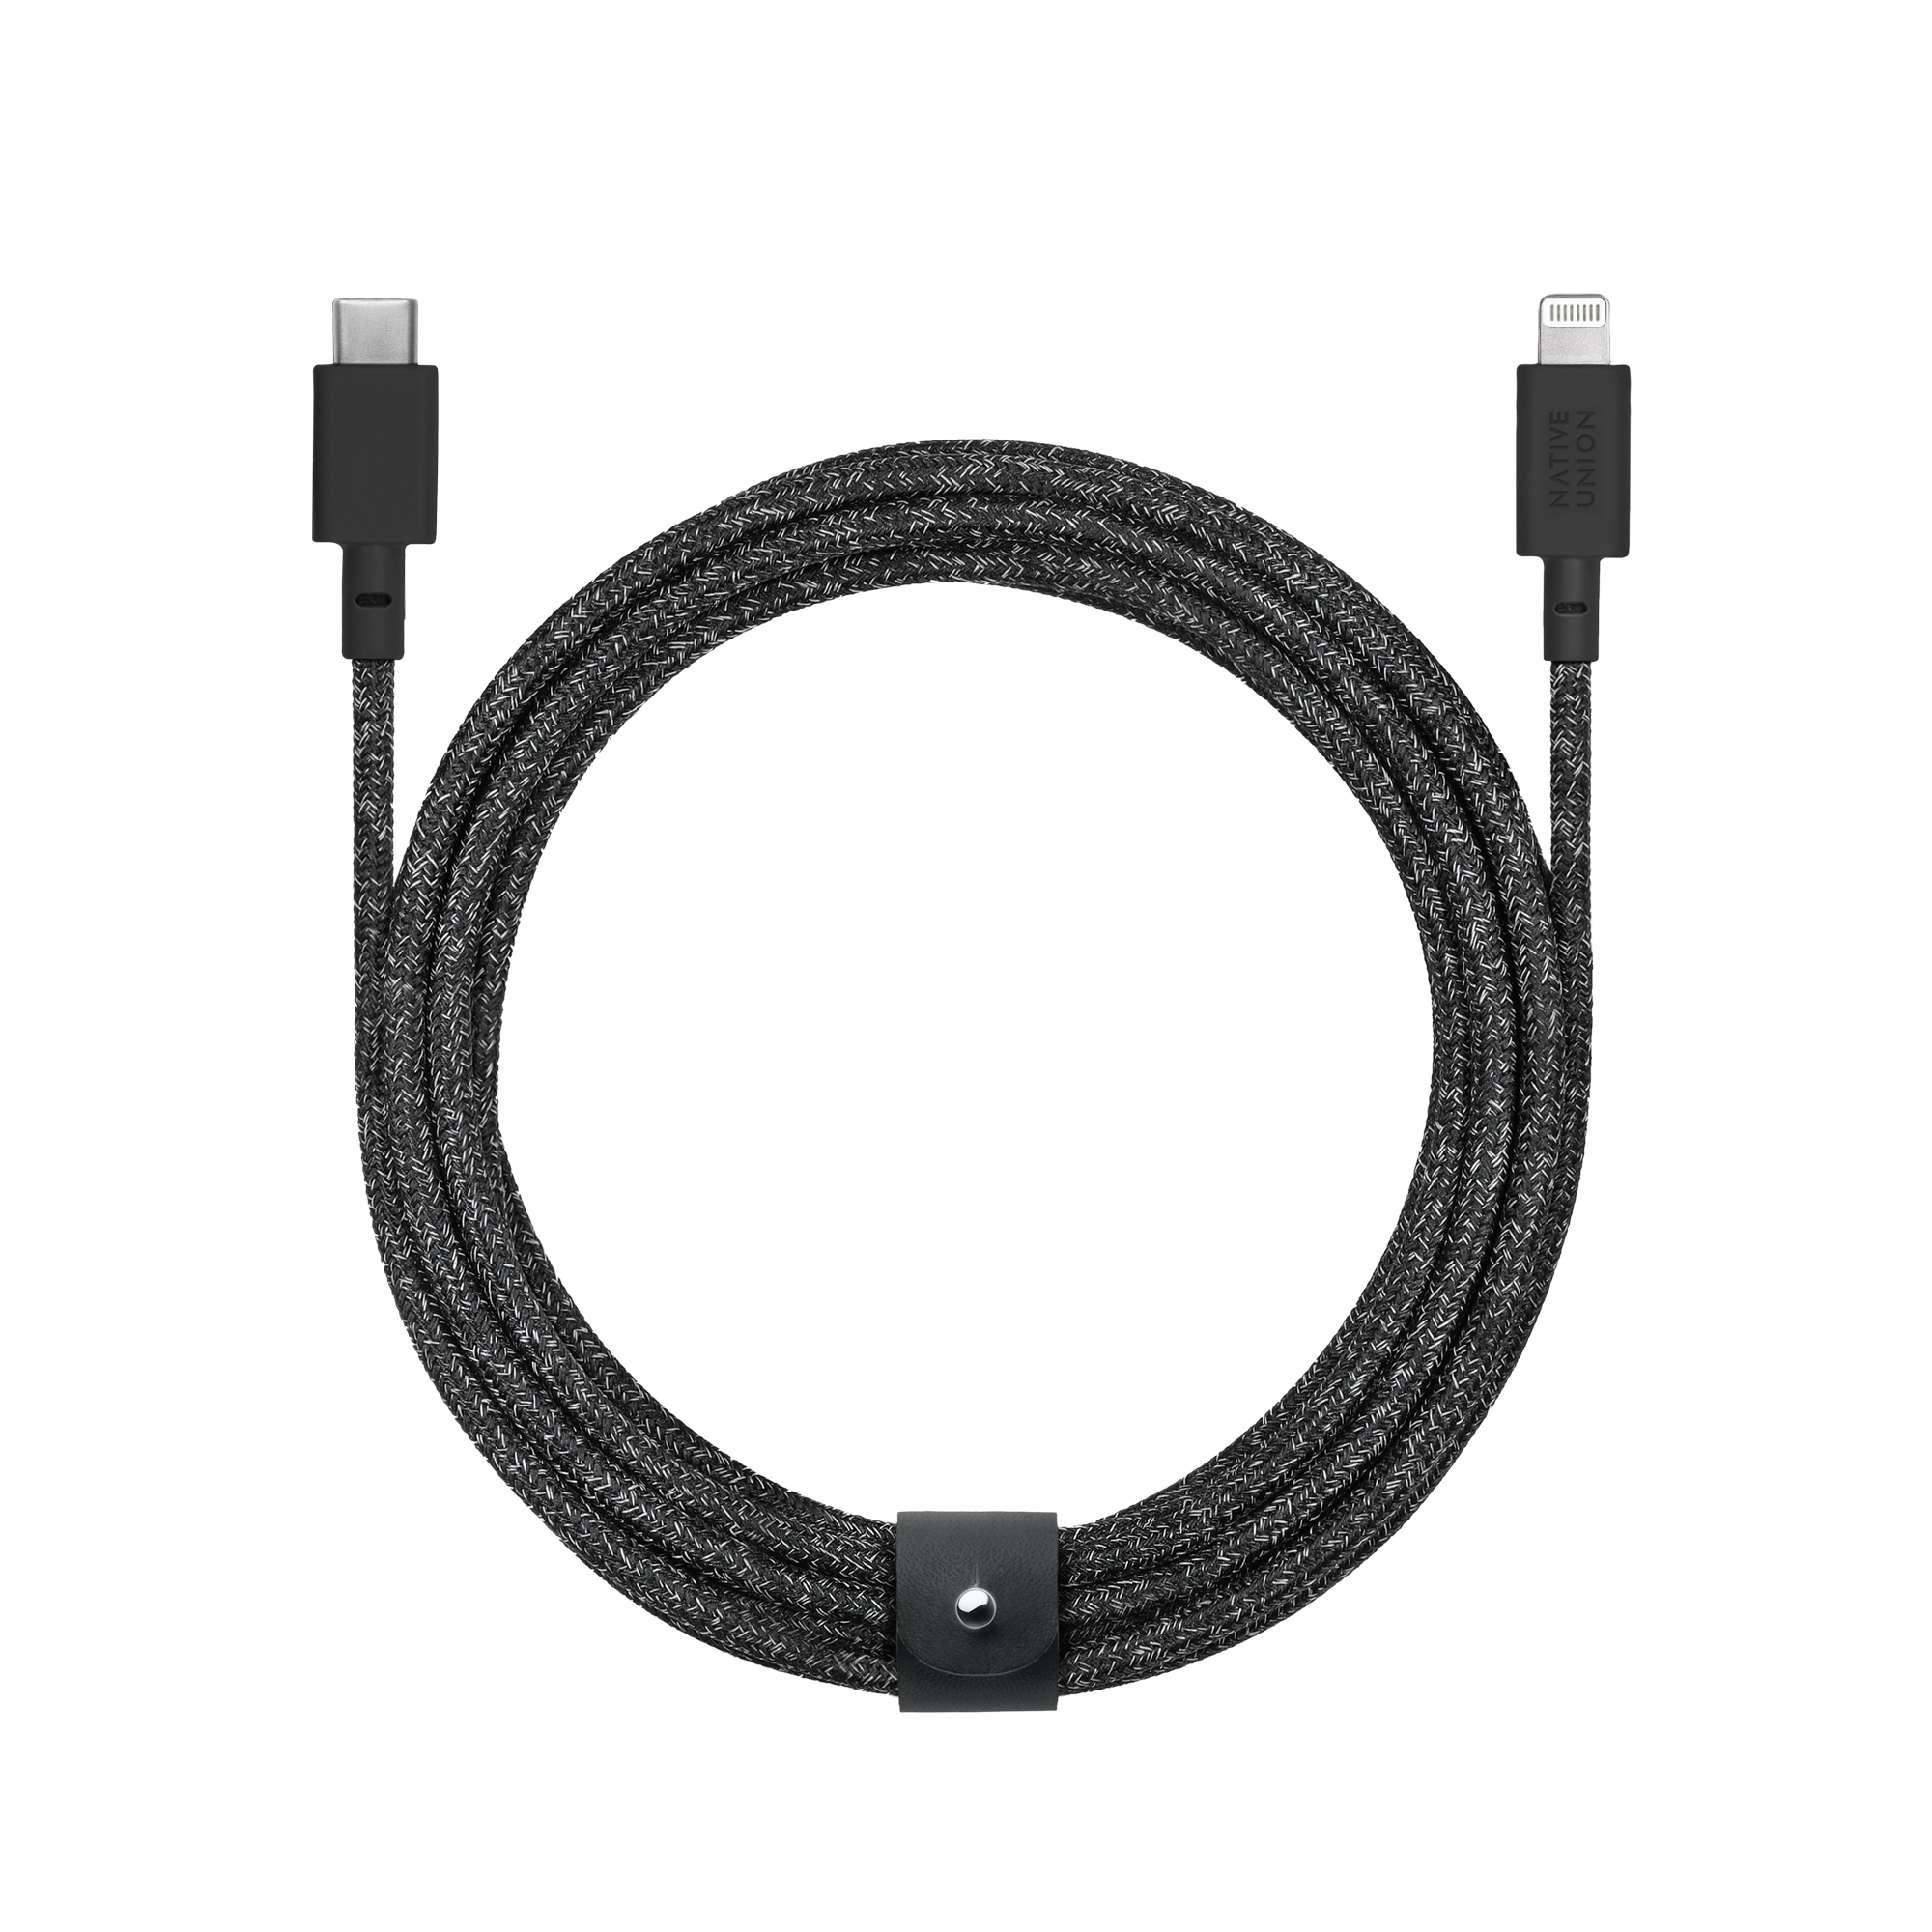 BELT CABLE XL (USB-C TO LIGHTNING) - Cosmos